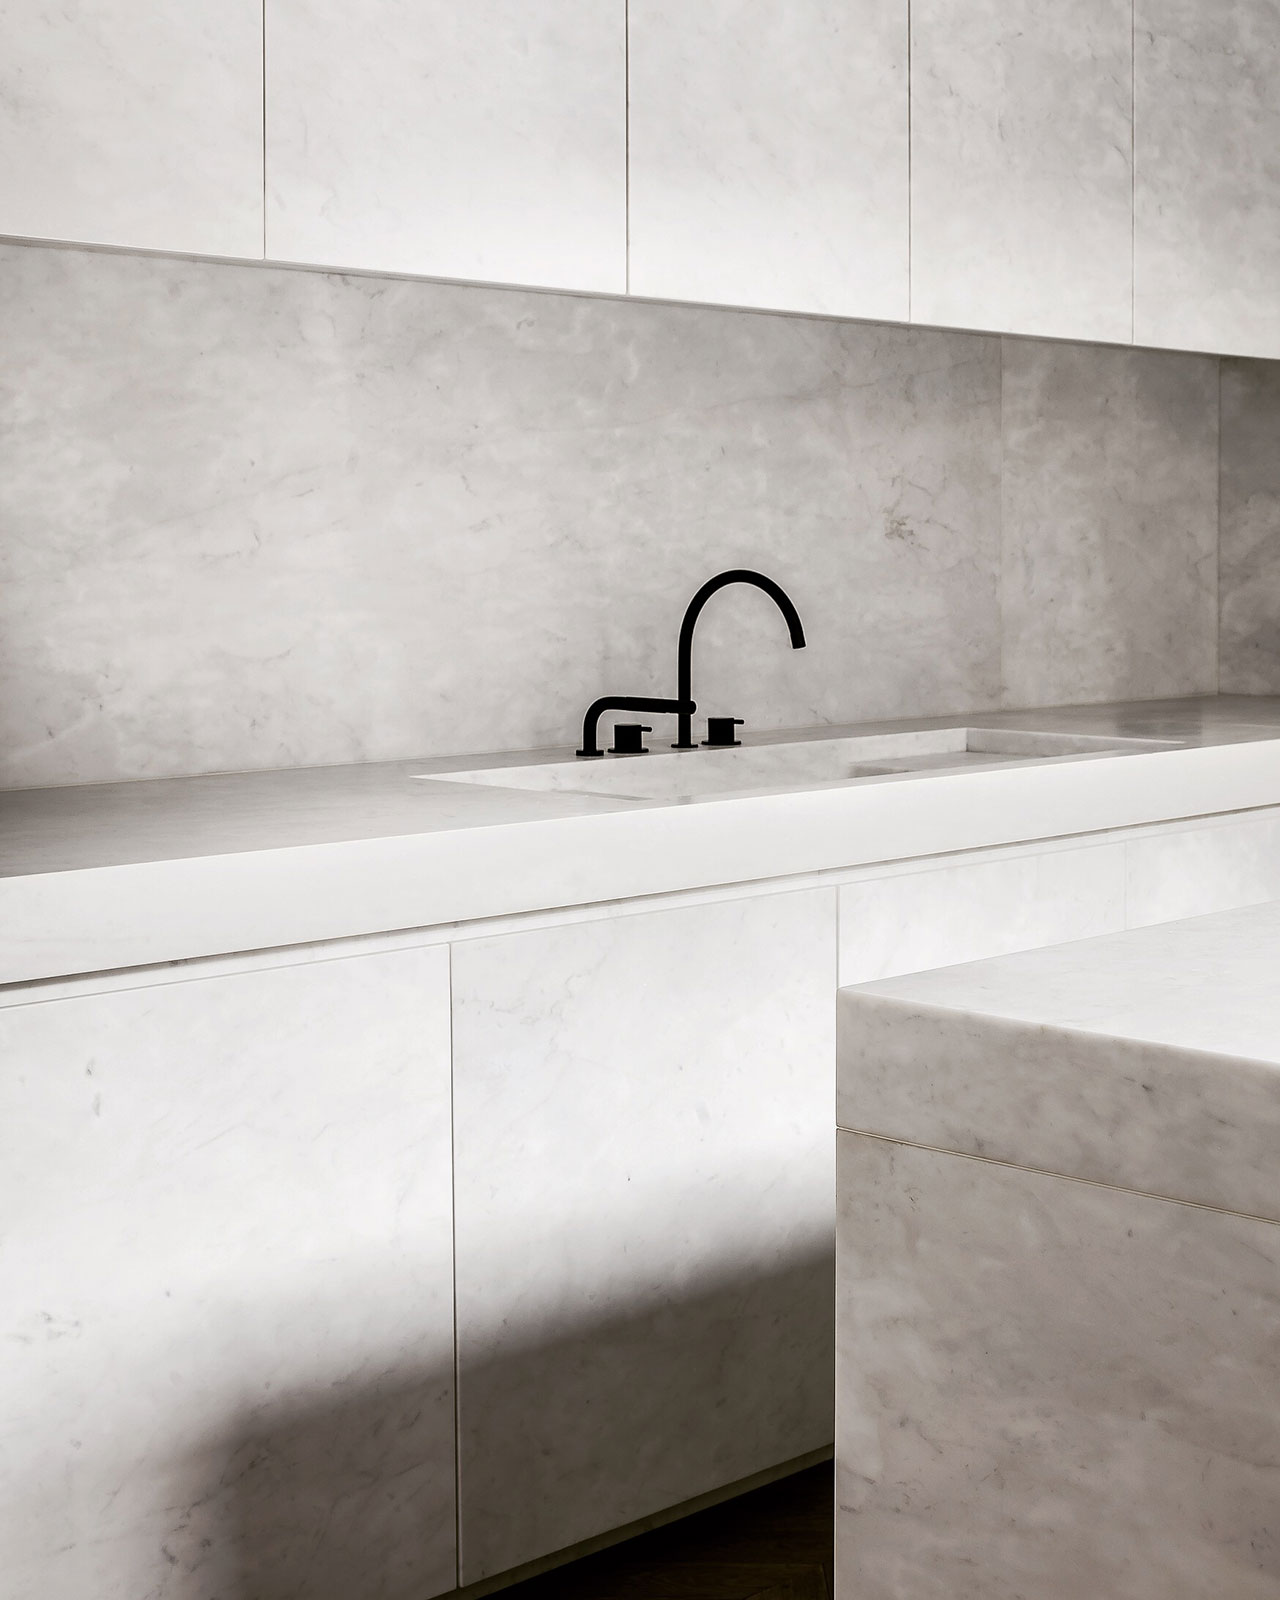 The kitchen is refined, fully clad with white marble and very chic, everything hidden and uncluttered